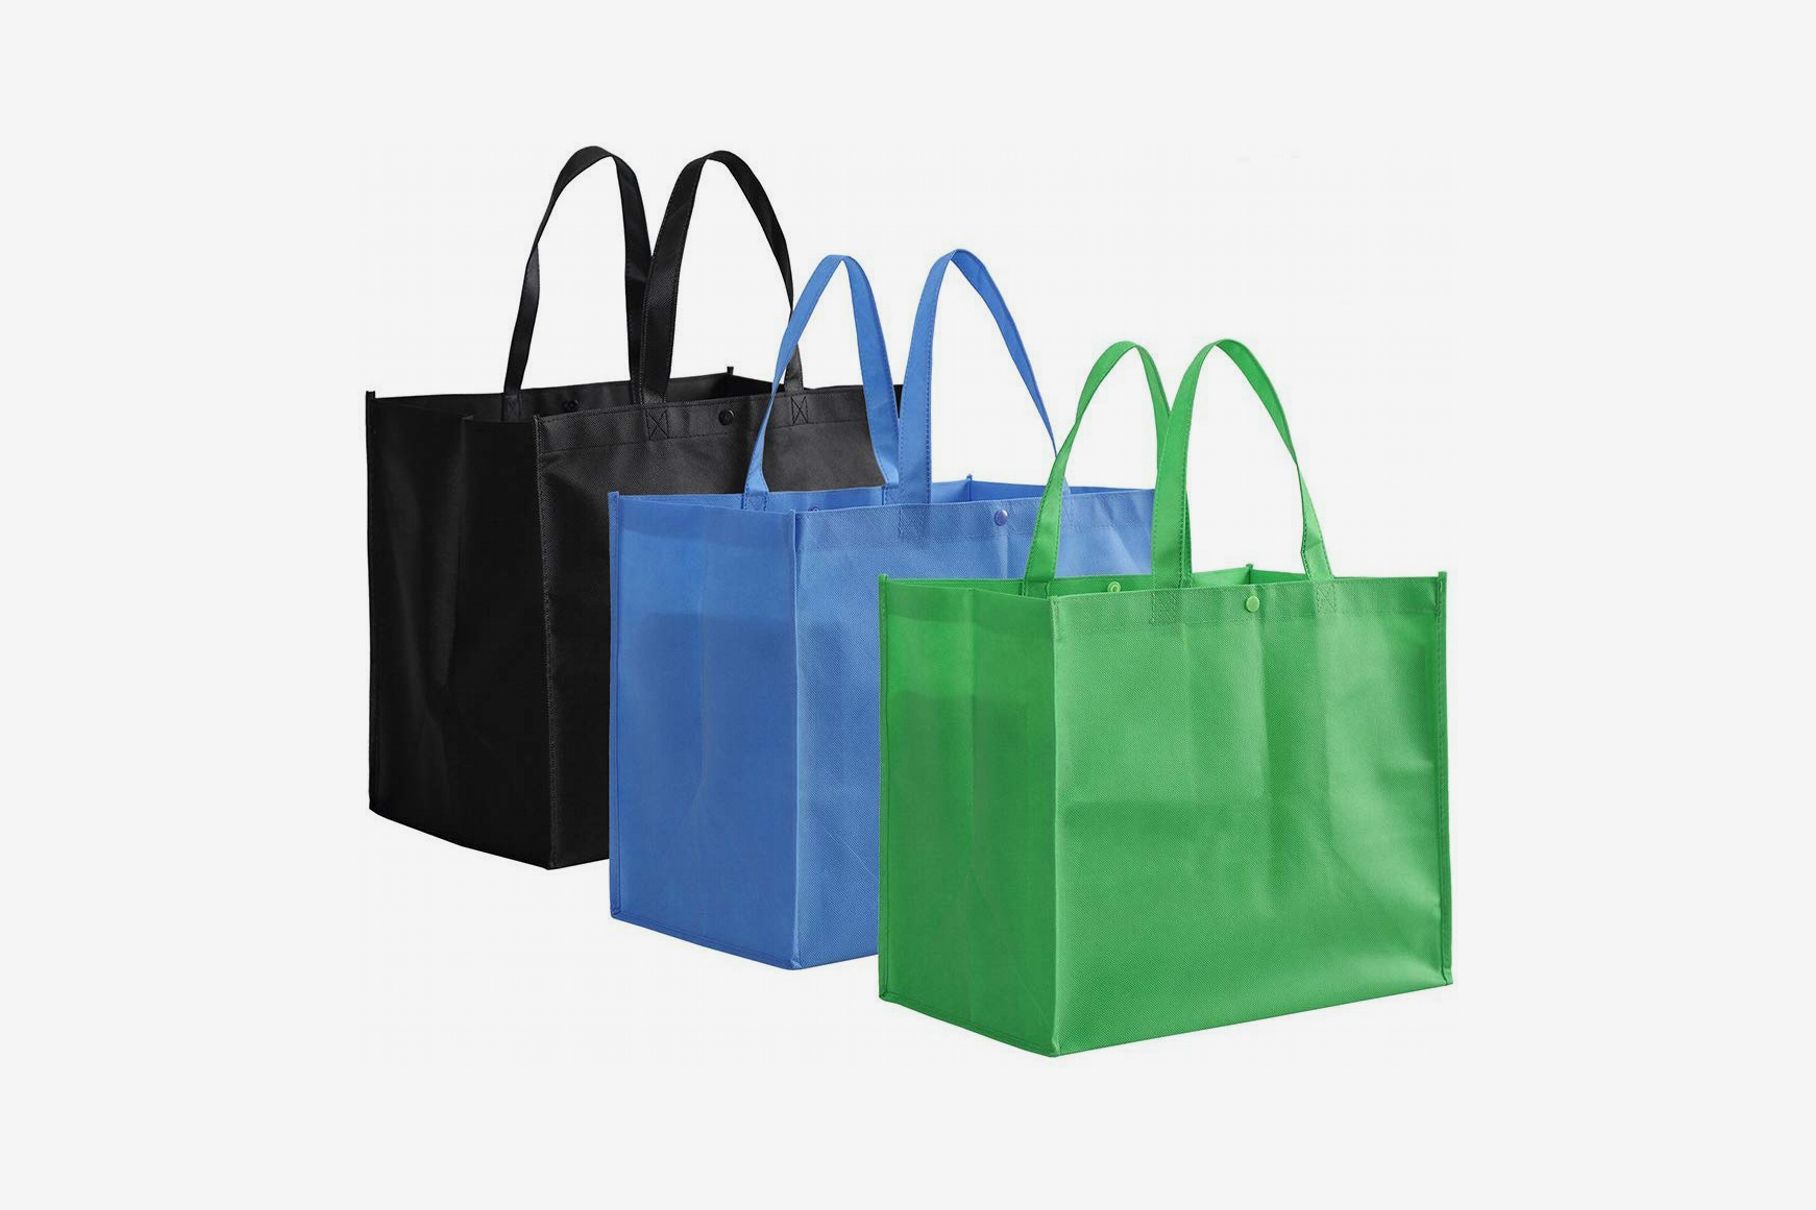 Details about   Foldable Shopping Bags Reusable Grocery Carry Bag Storage Bags Handbags Tote 